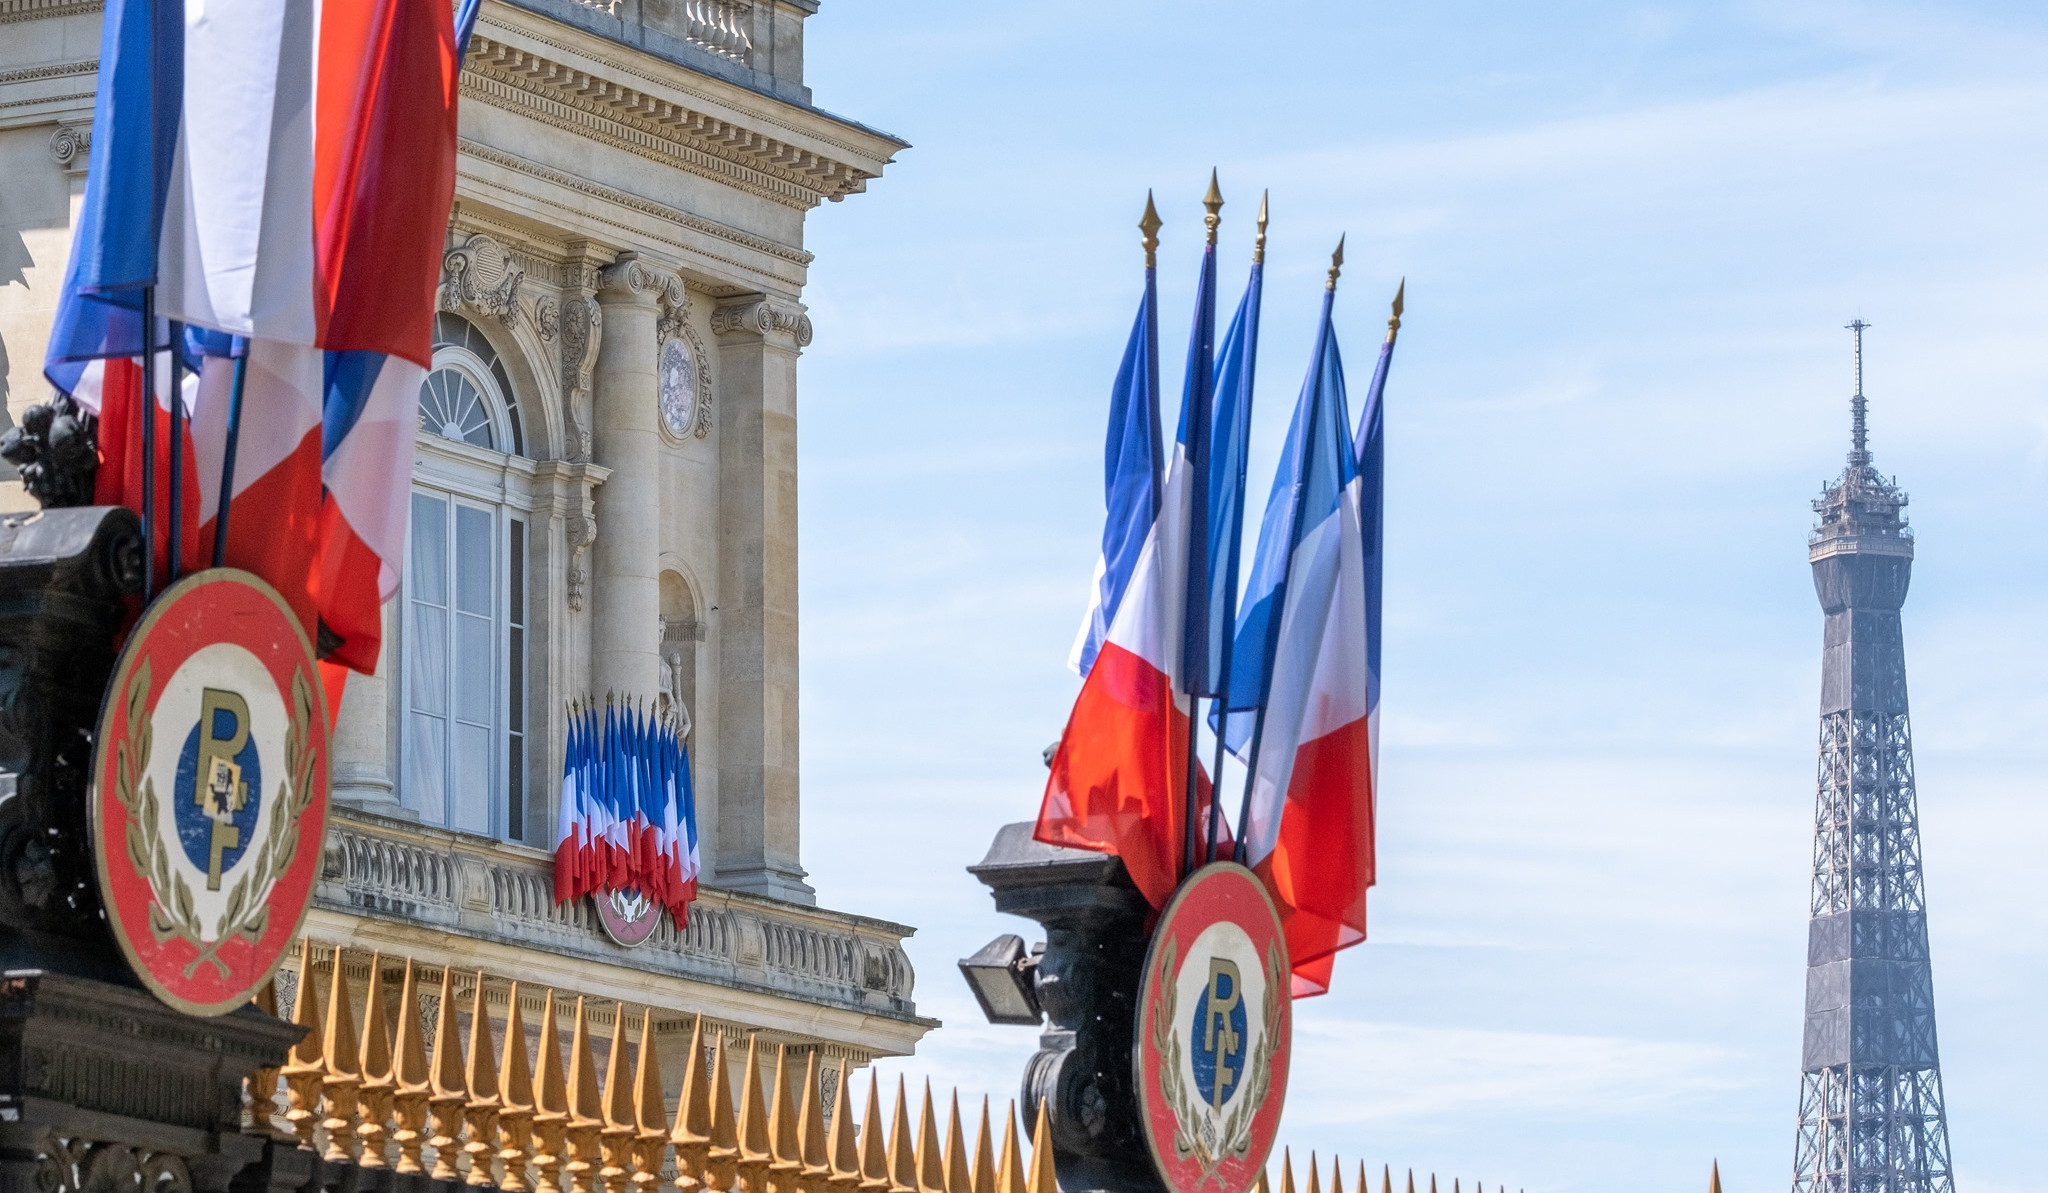 France expresses its solidarity with Armenia